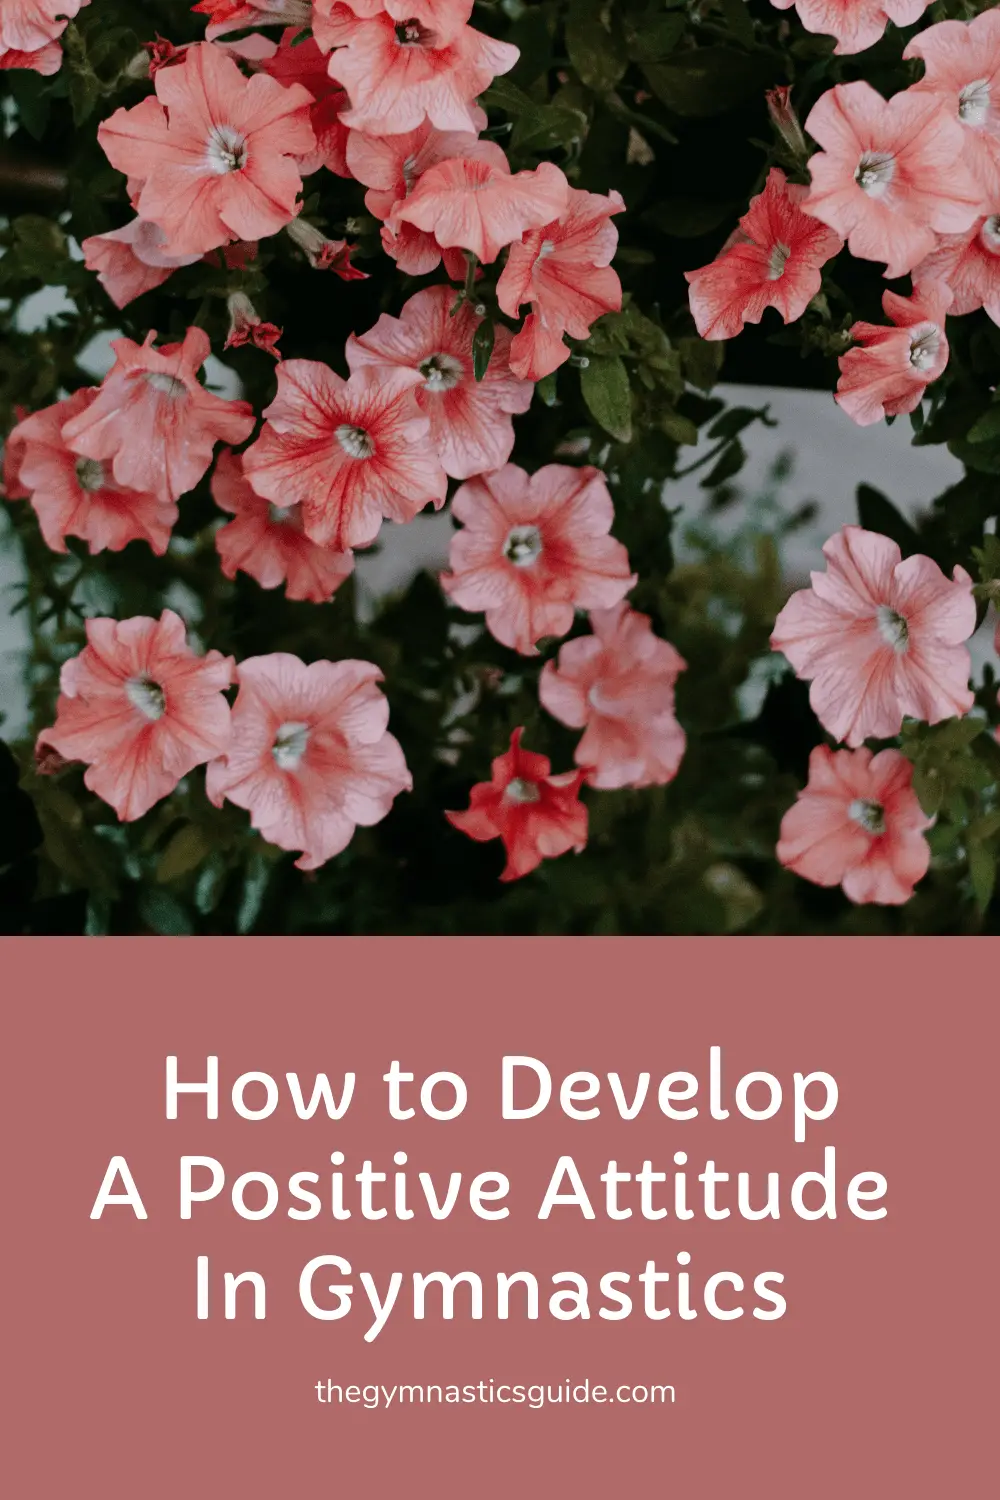 How to Develop a Positive Attitude in Gymnastics